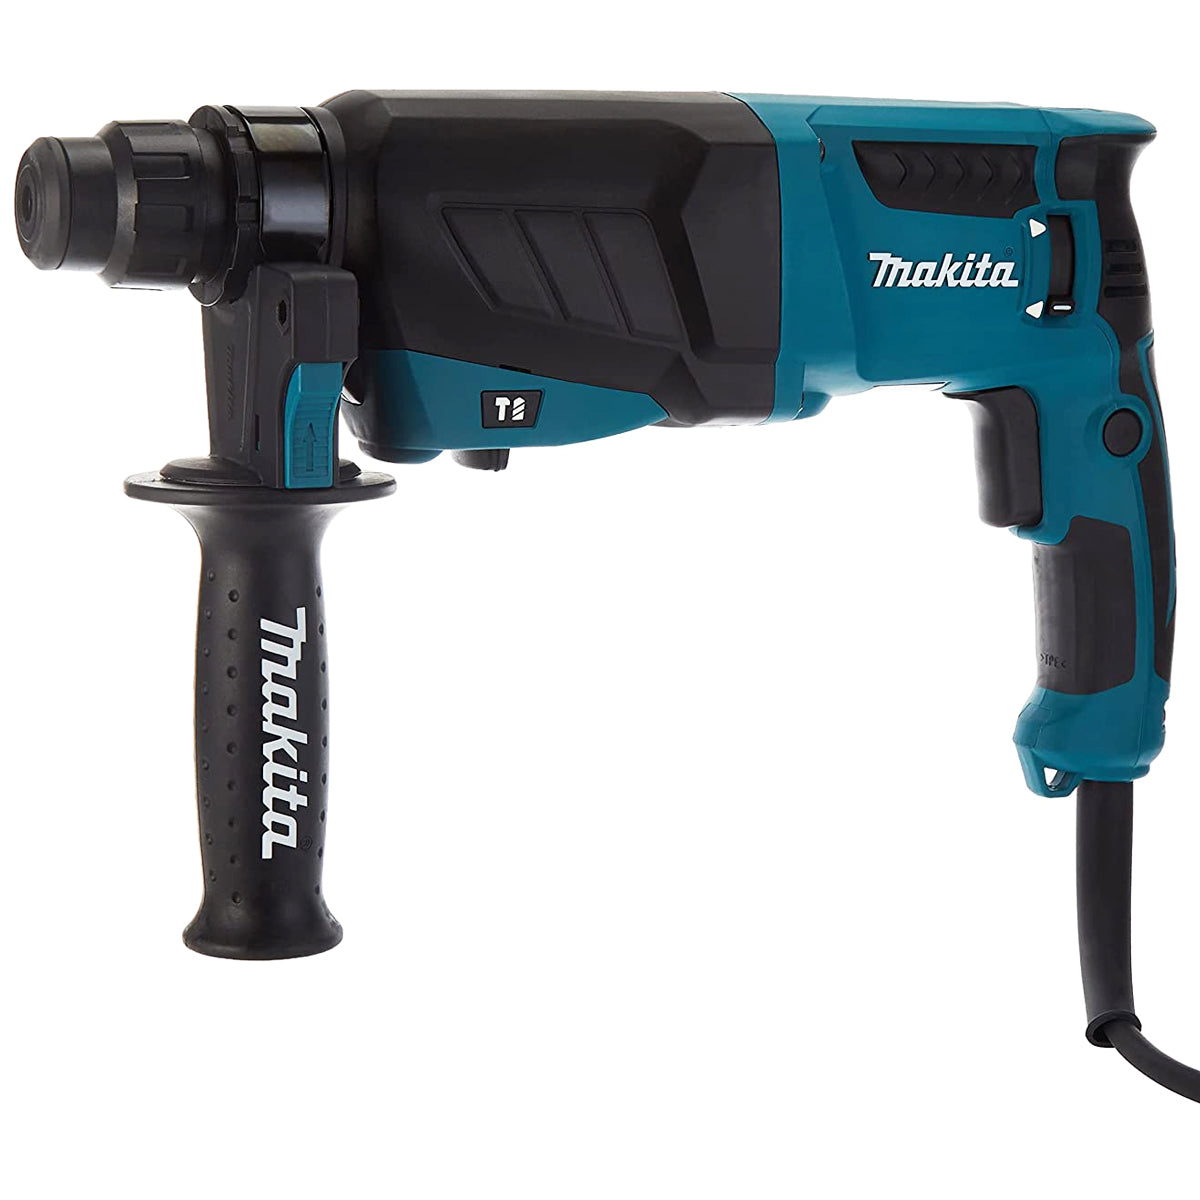 Makita HR2630/1 3 Mode SDS+ Rotary Hammer Drill 110V Replaces HR2610